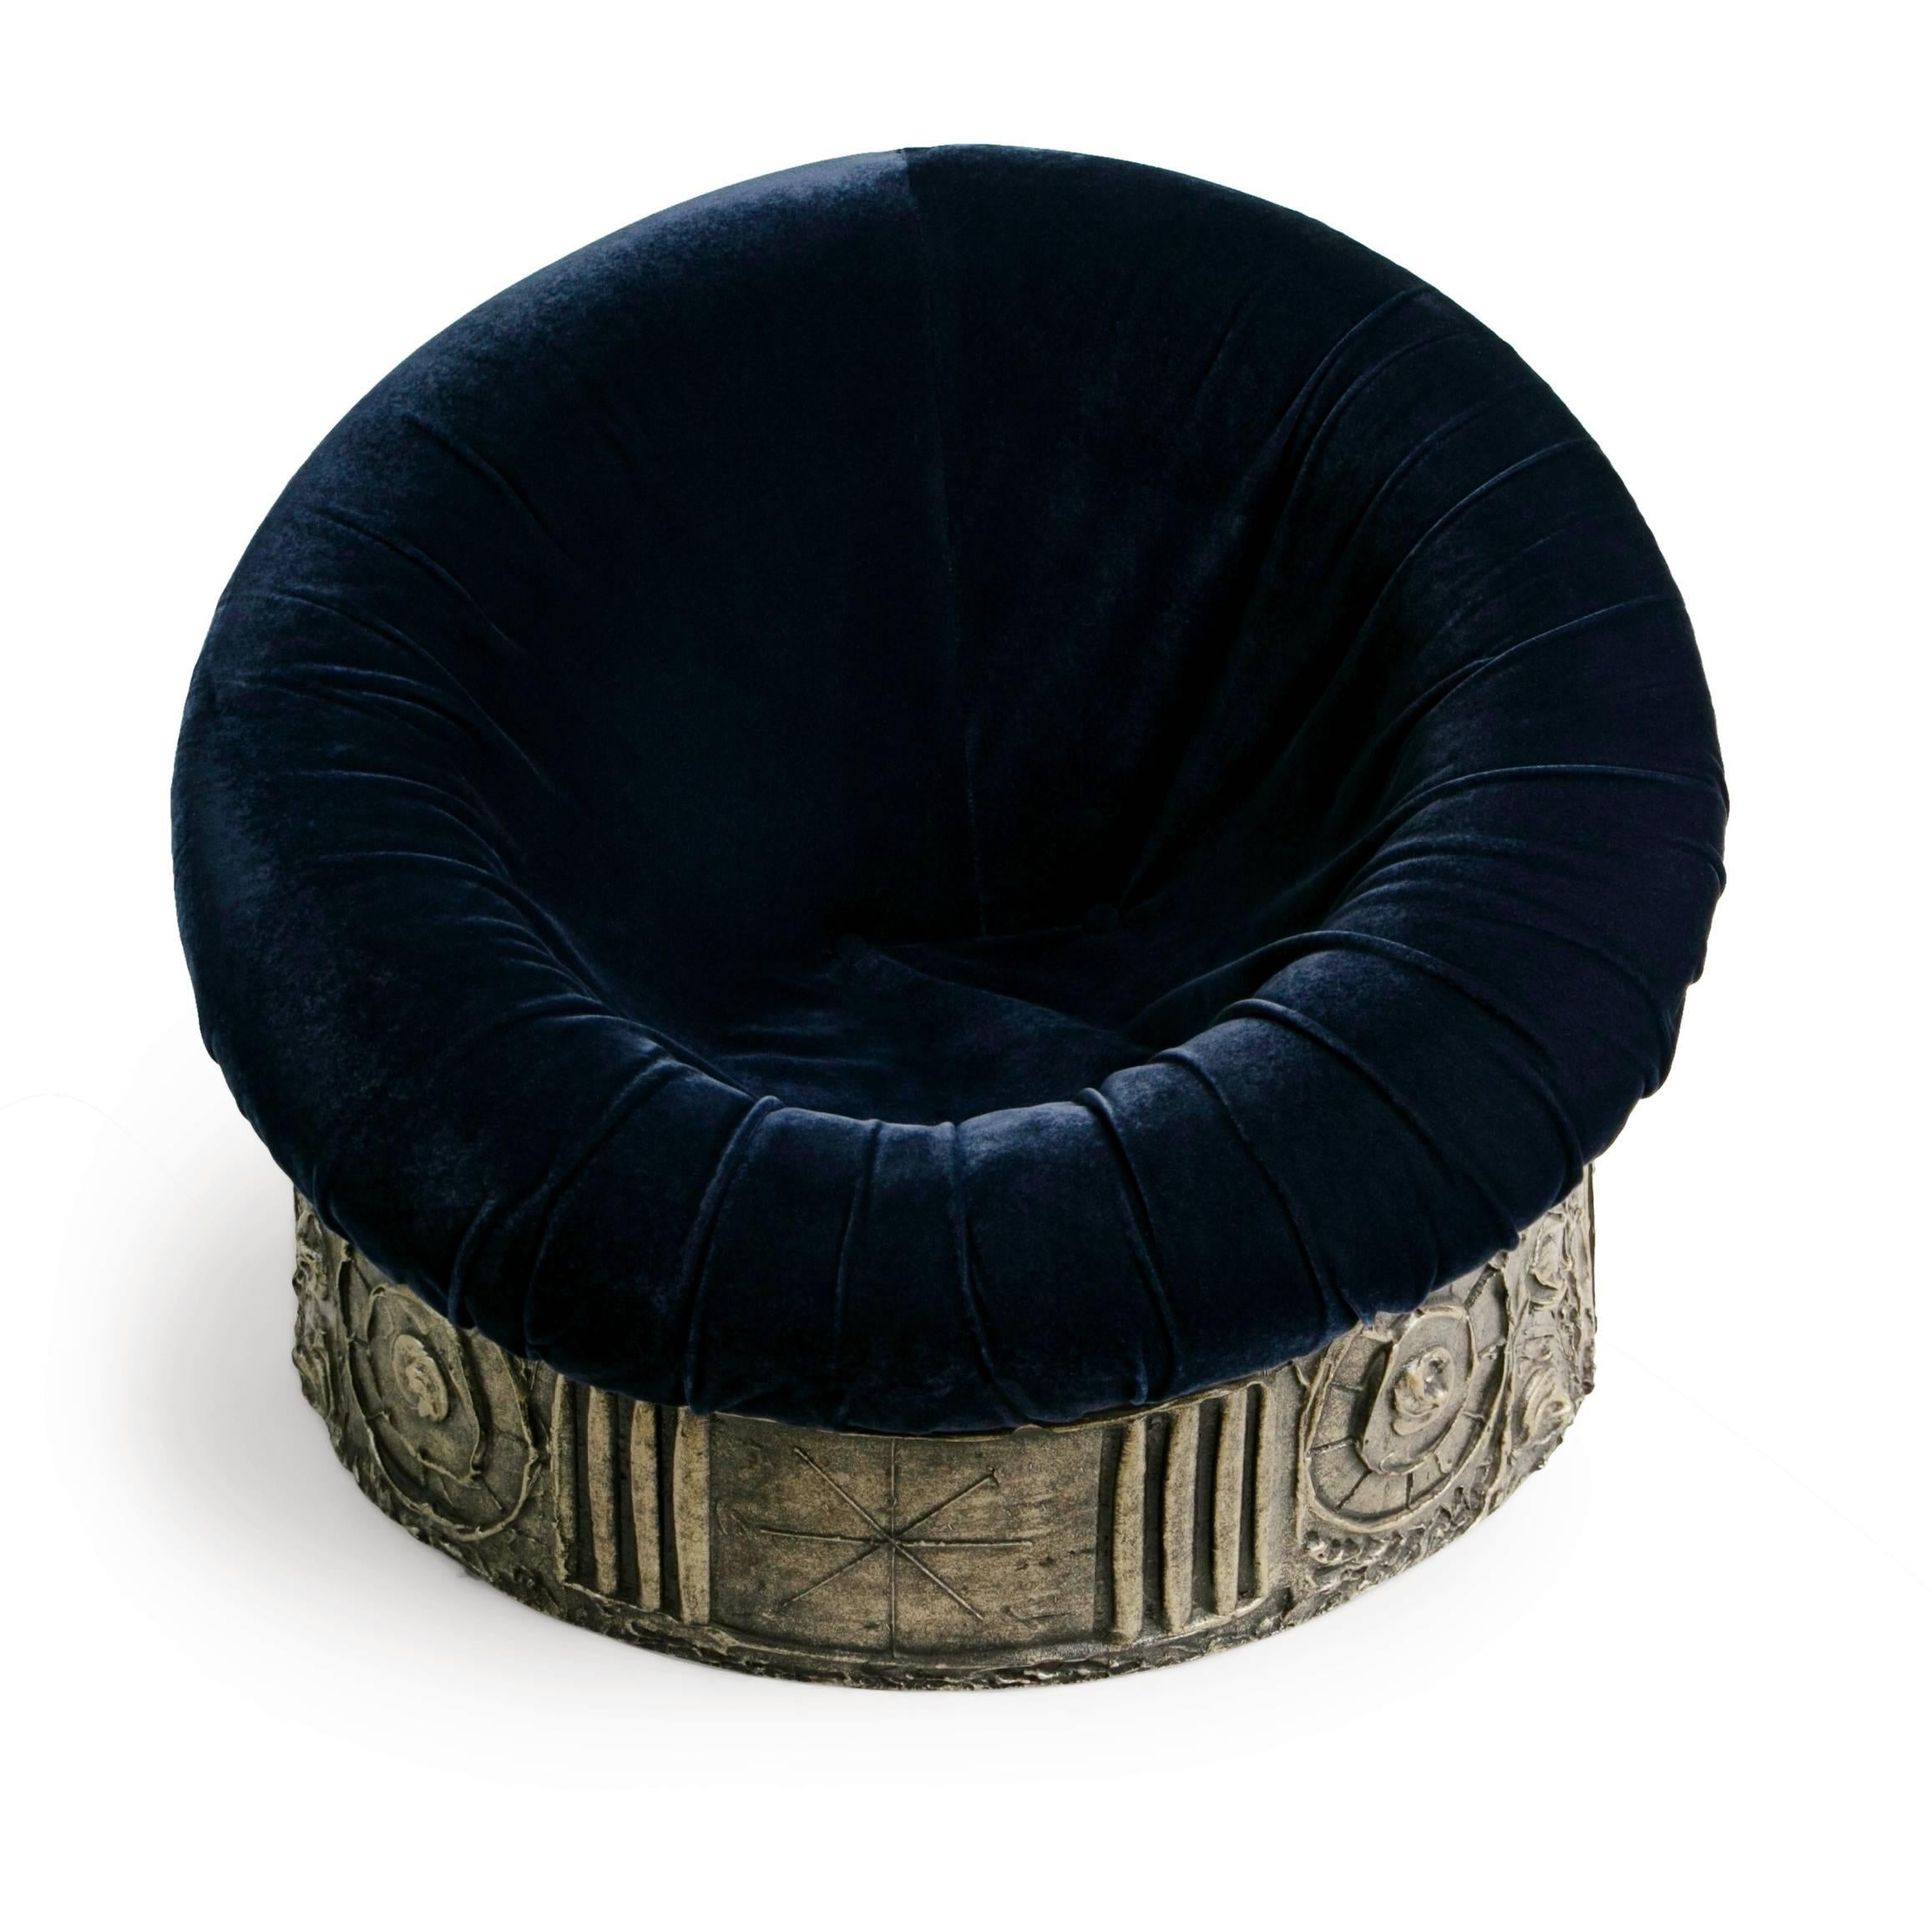 An excellent example of Adrian Pearsall's Brutalist creations for Craft Associates. This tub chair offers a deep comfortable seat upholstered in an on-trend navy velvet with ruching and button tufting, perfect for sitting back and relaxing. This